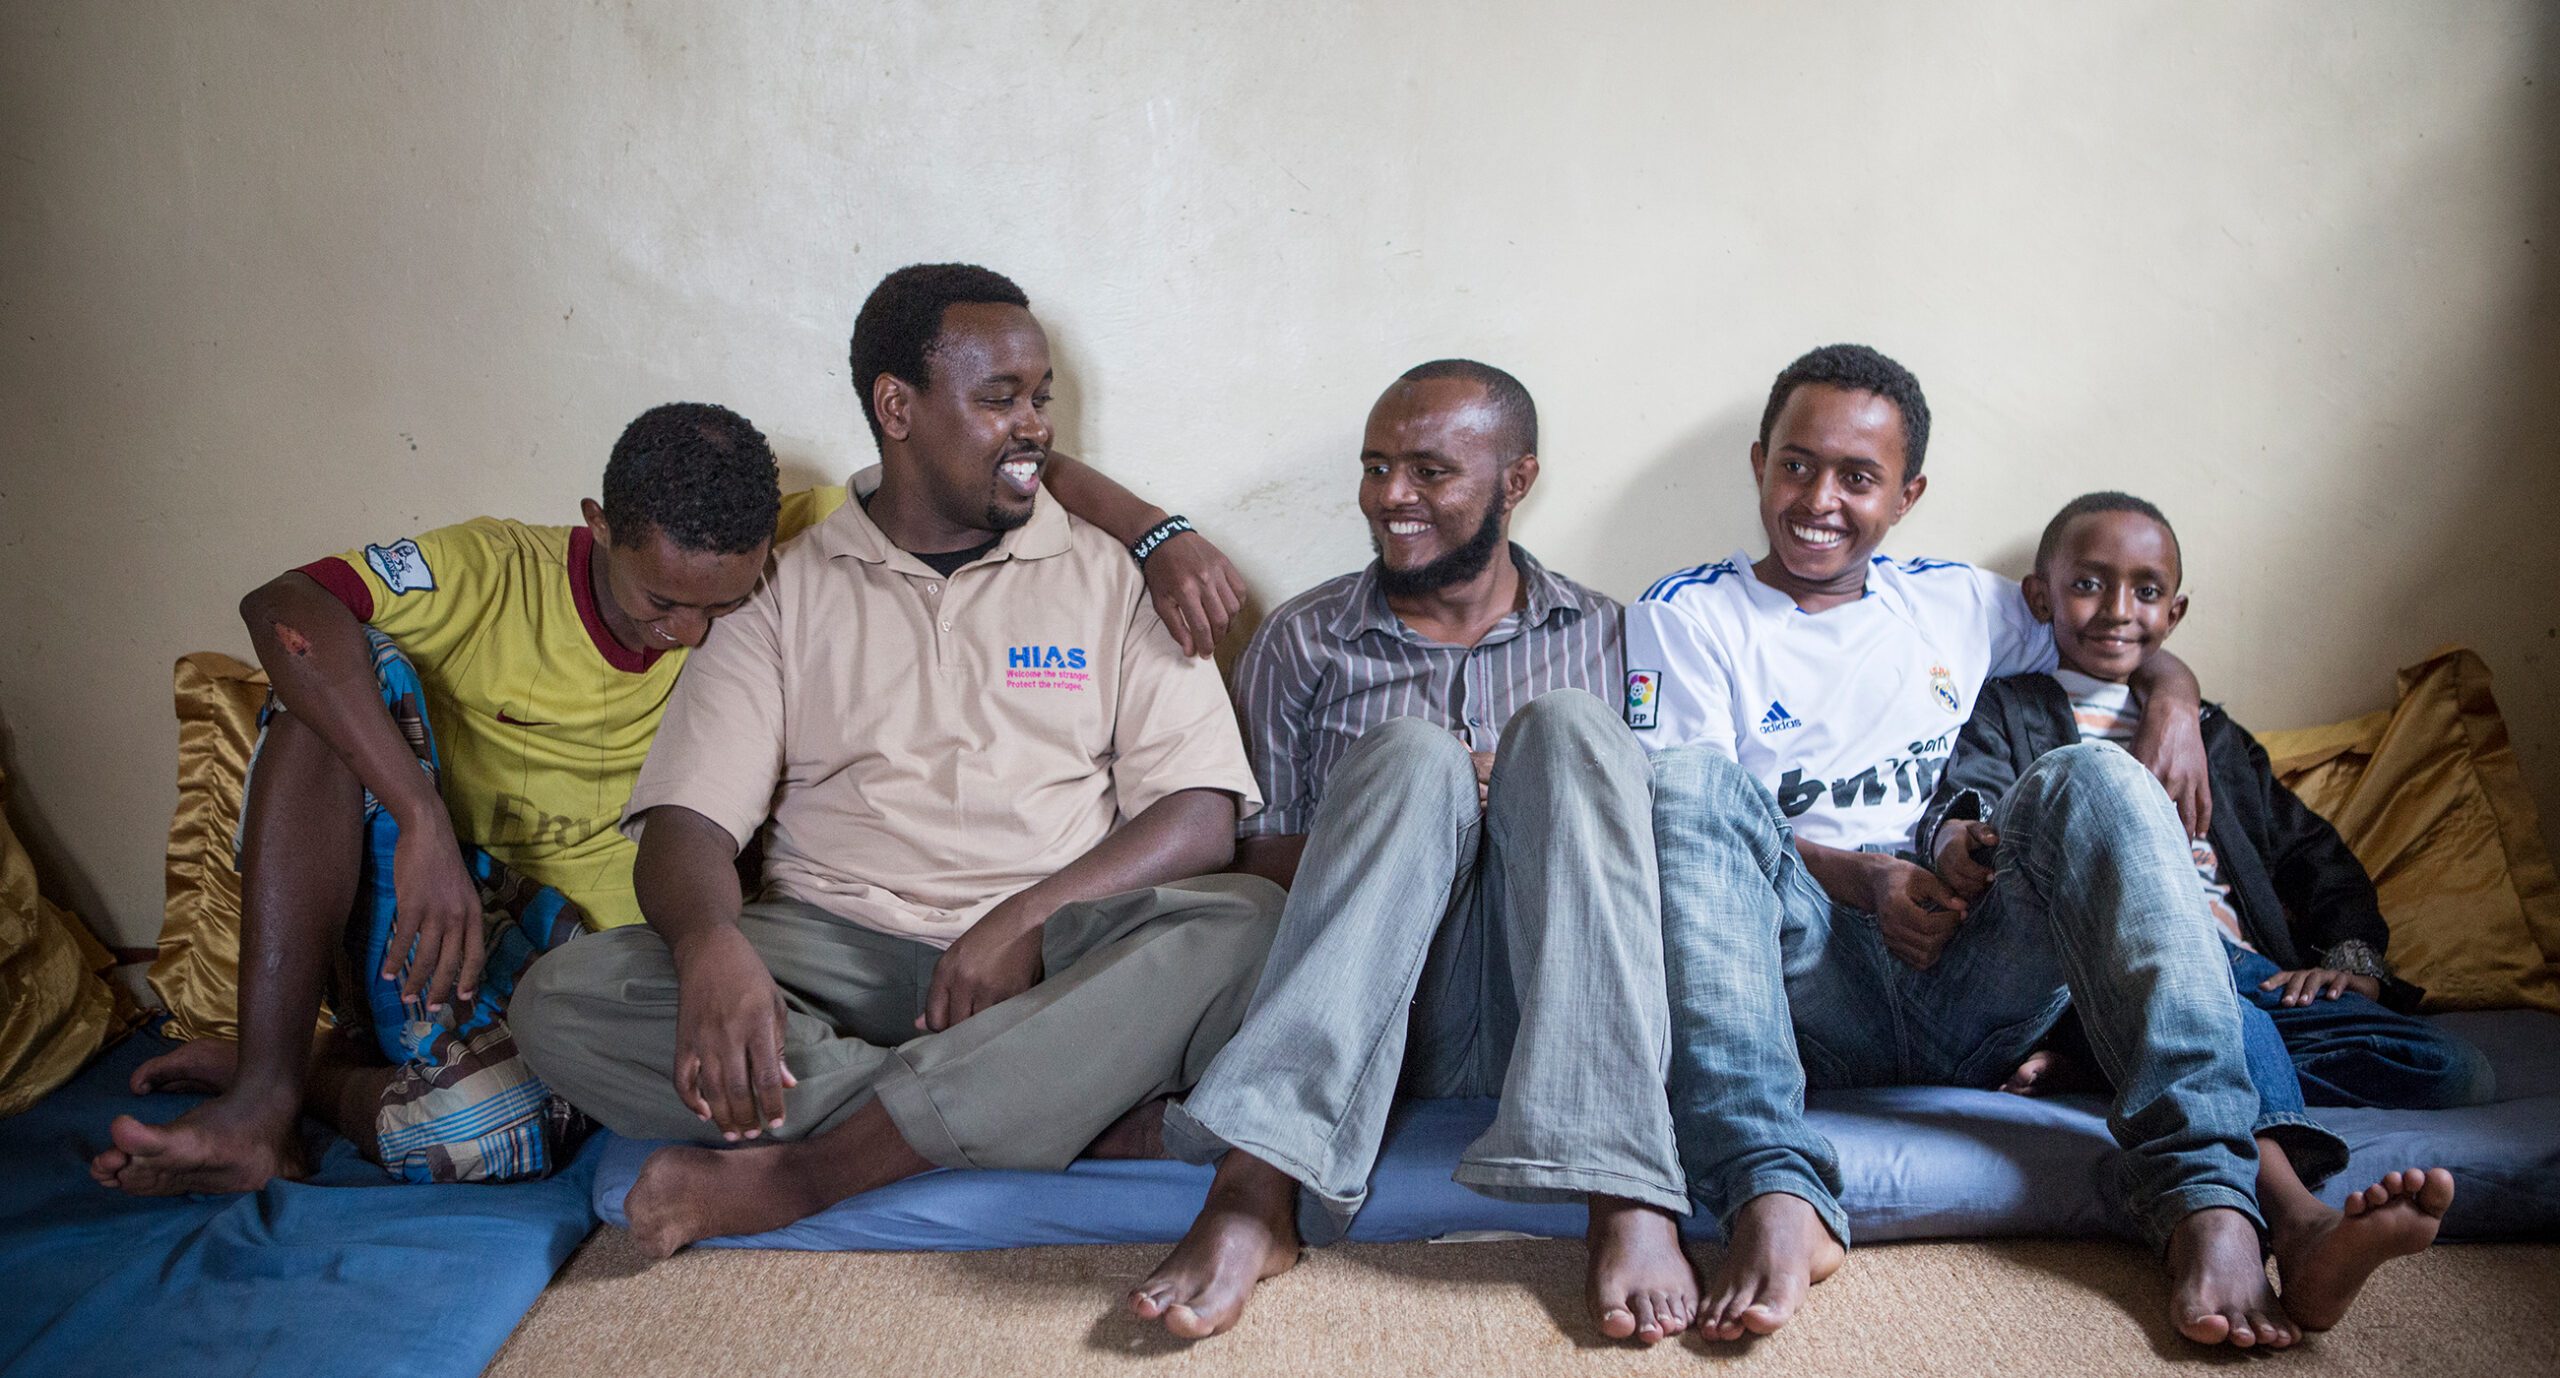 A HIAS local staff member meets with an Ethiopian family seeking asylum. He helps make sure that the needs of the family are met as they wait.  (Glenna Gordon for HIAS)